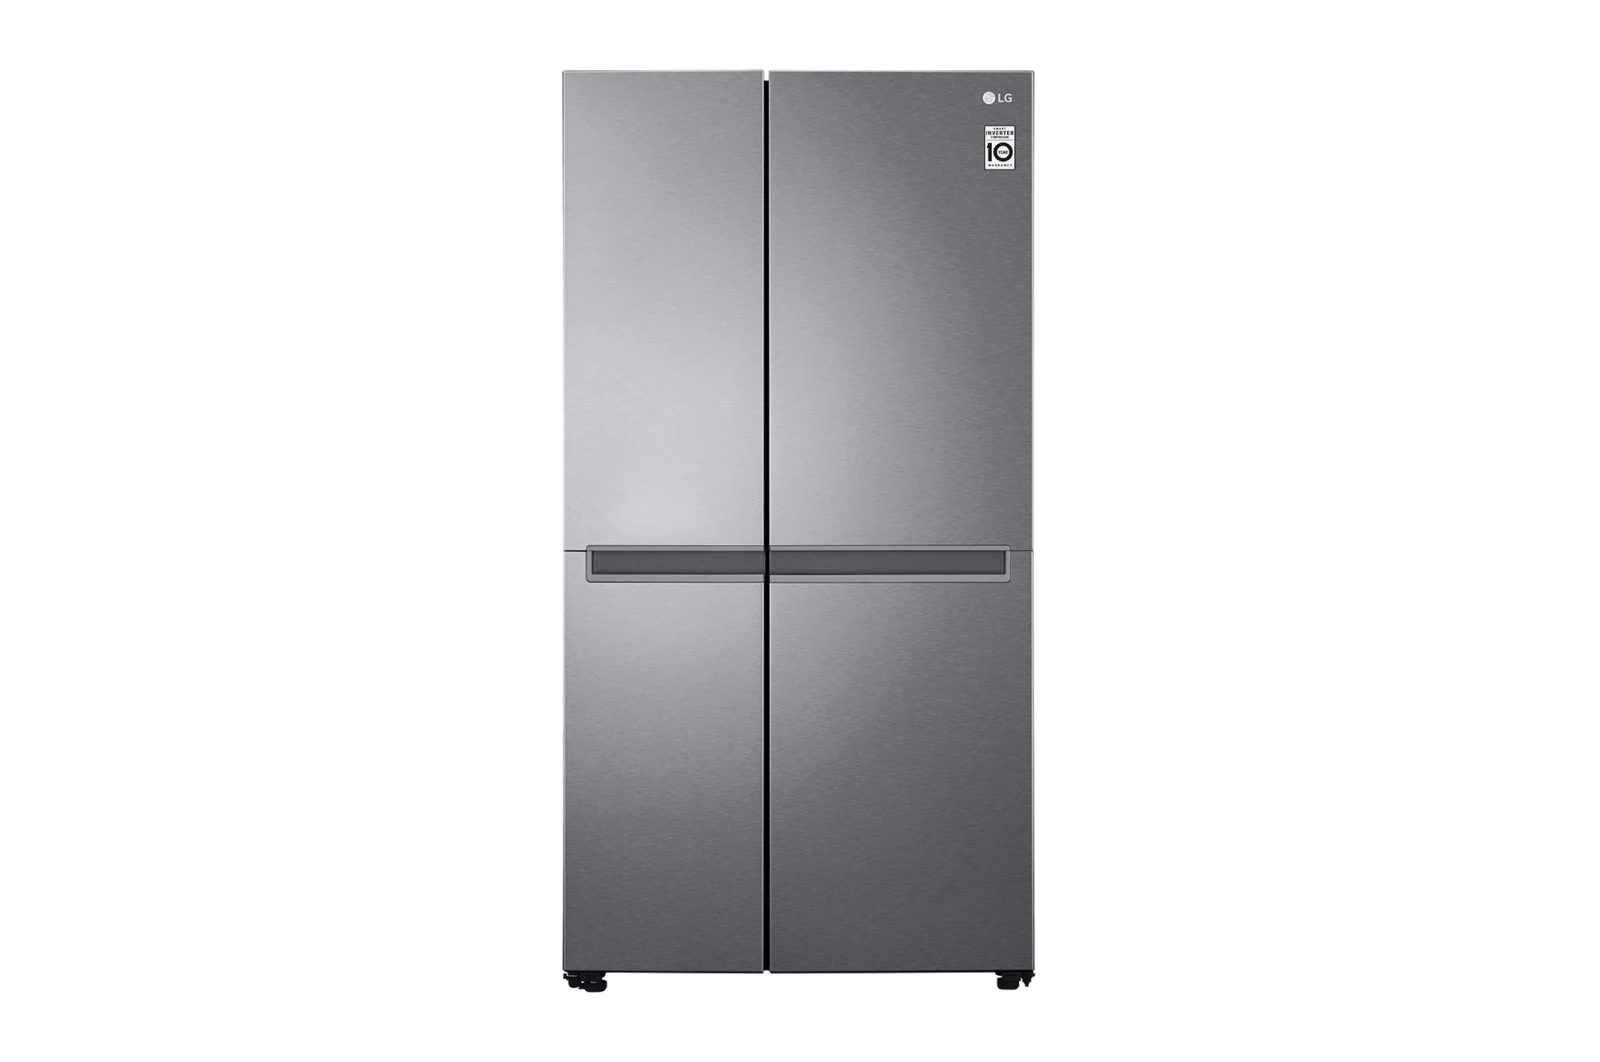 LG 643 Liters Refrigerator With LinearCooling™ Technology - Silver